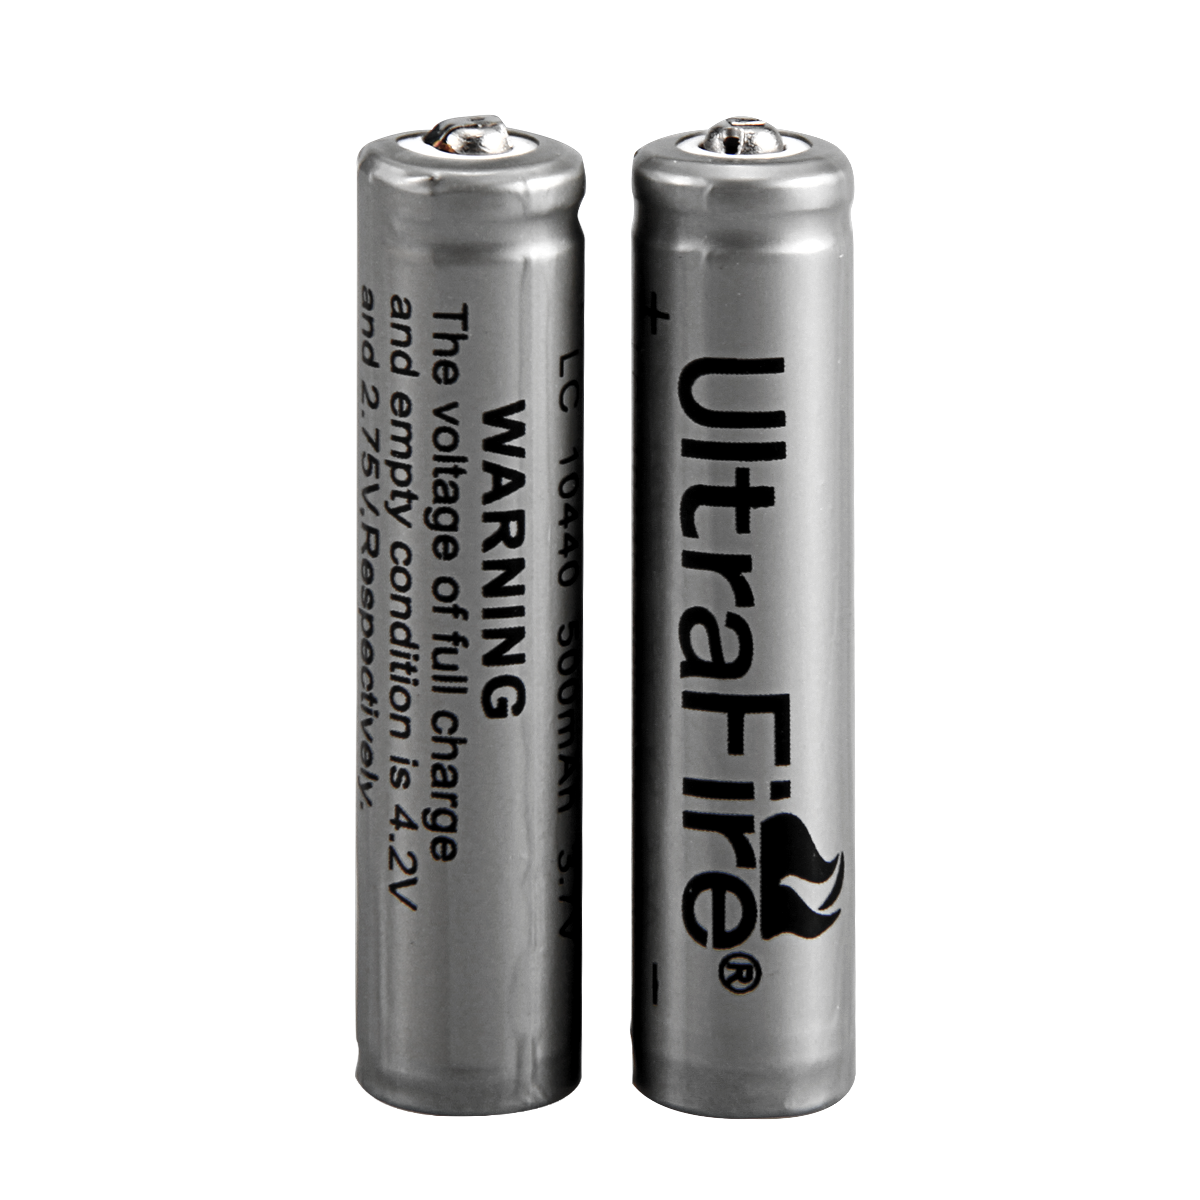 UltraFire 500mAh 3.7V 10440 Rechargeable Lithium Battery With Protection Board (2PCS)